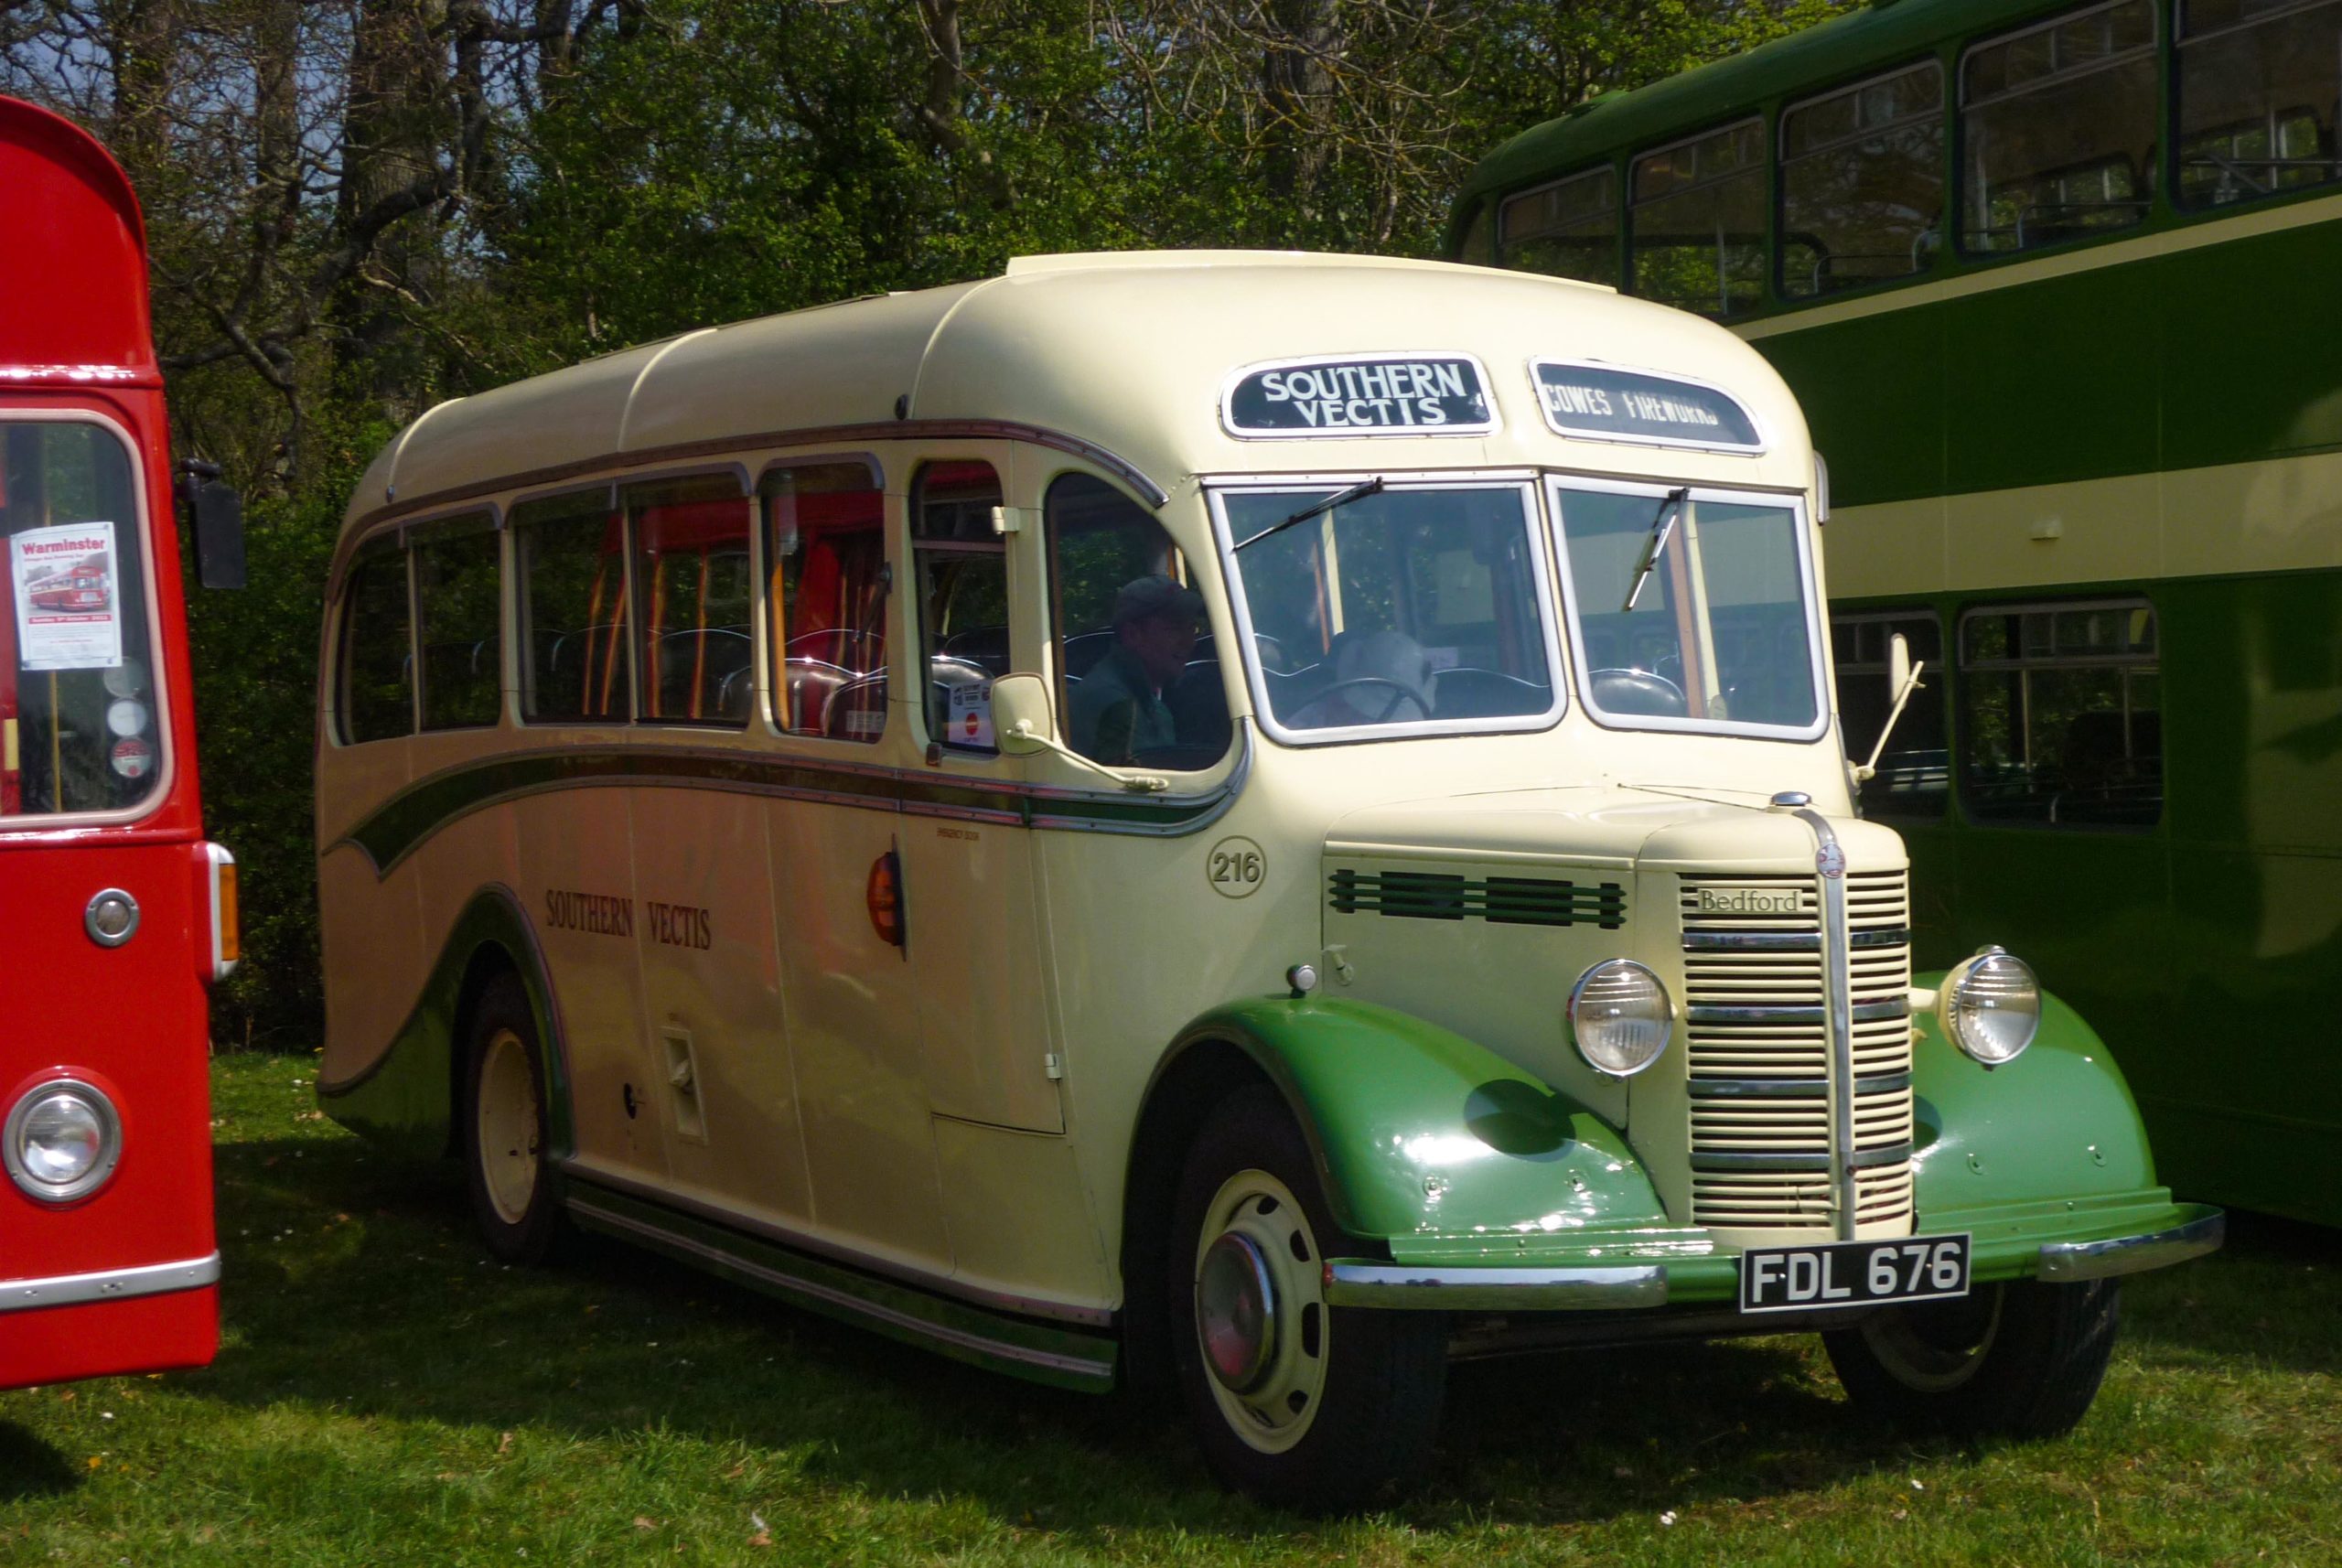 Isle of Wight Bus and Coaches Museum © Iveco 59-12 - licence [CC BY 3.0] from Wikimedia Commons